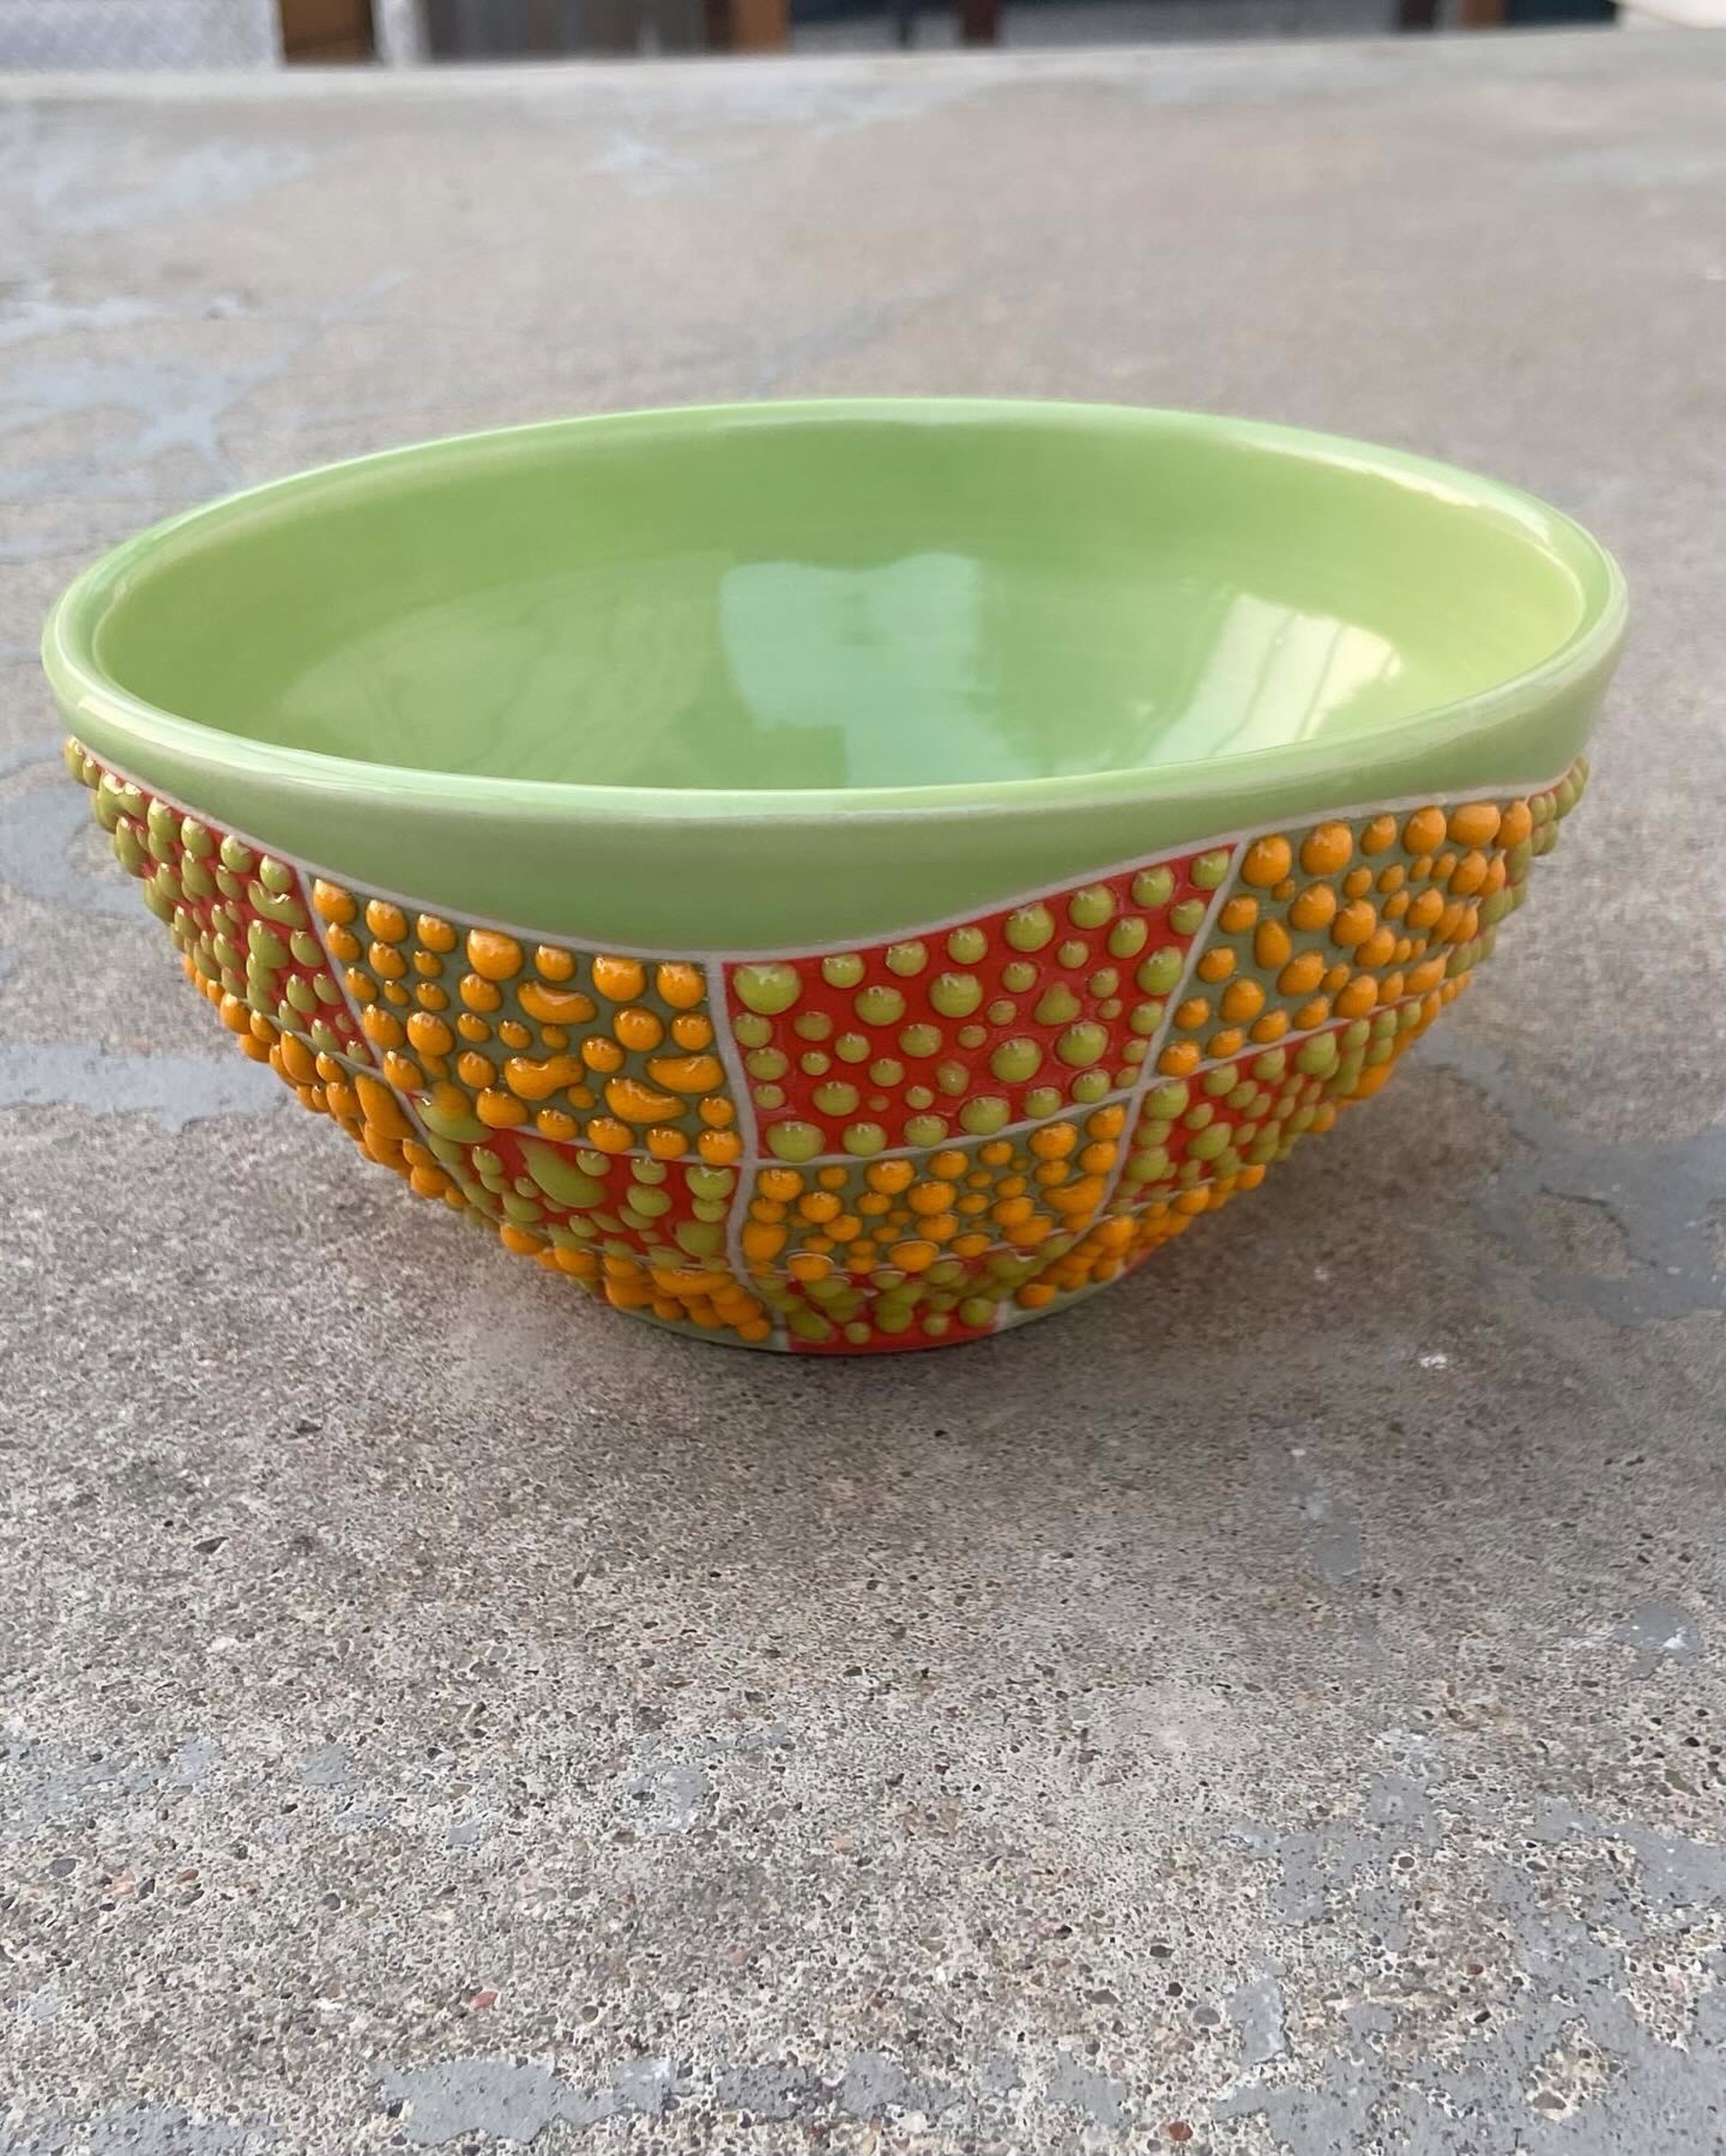 Checkered Gloopy Bowl 01 by Cassie Sullivan